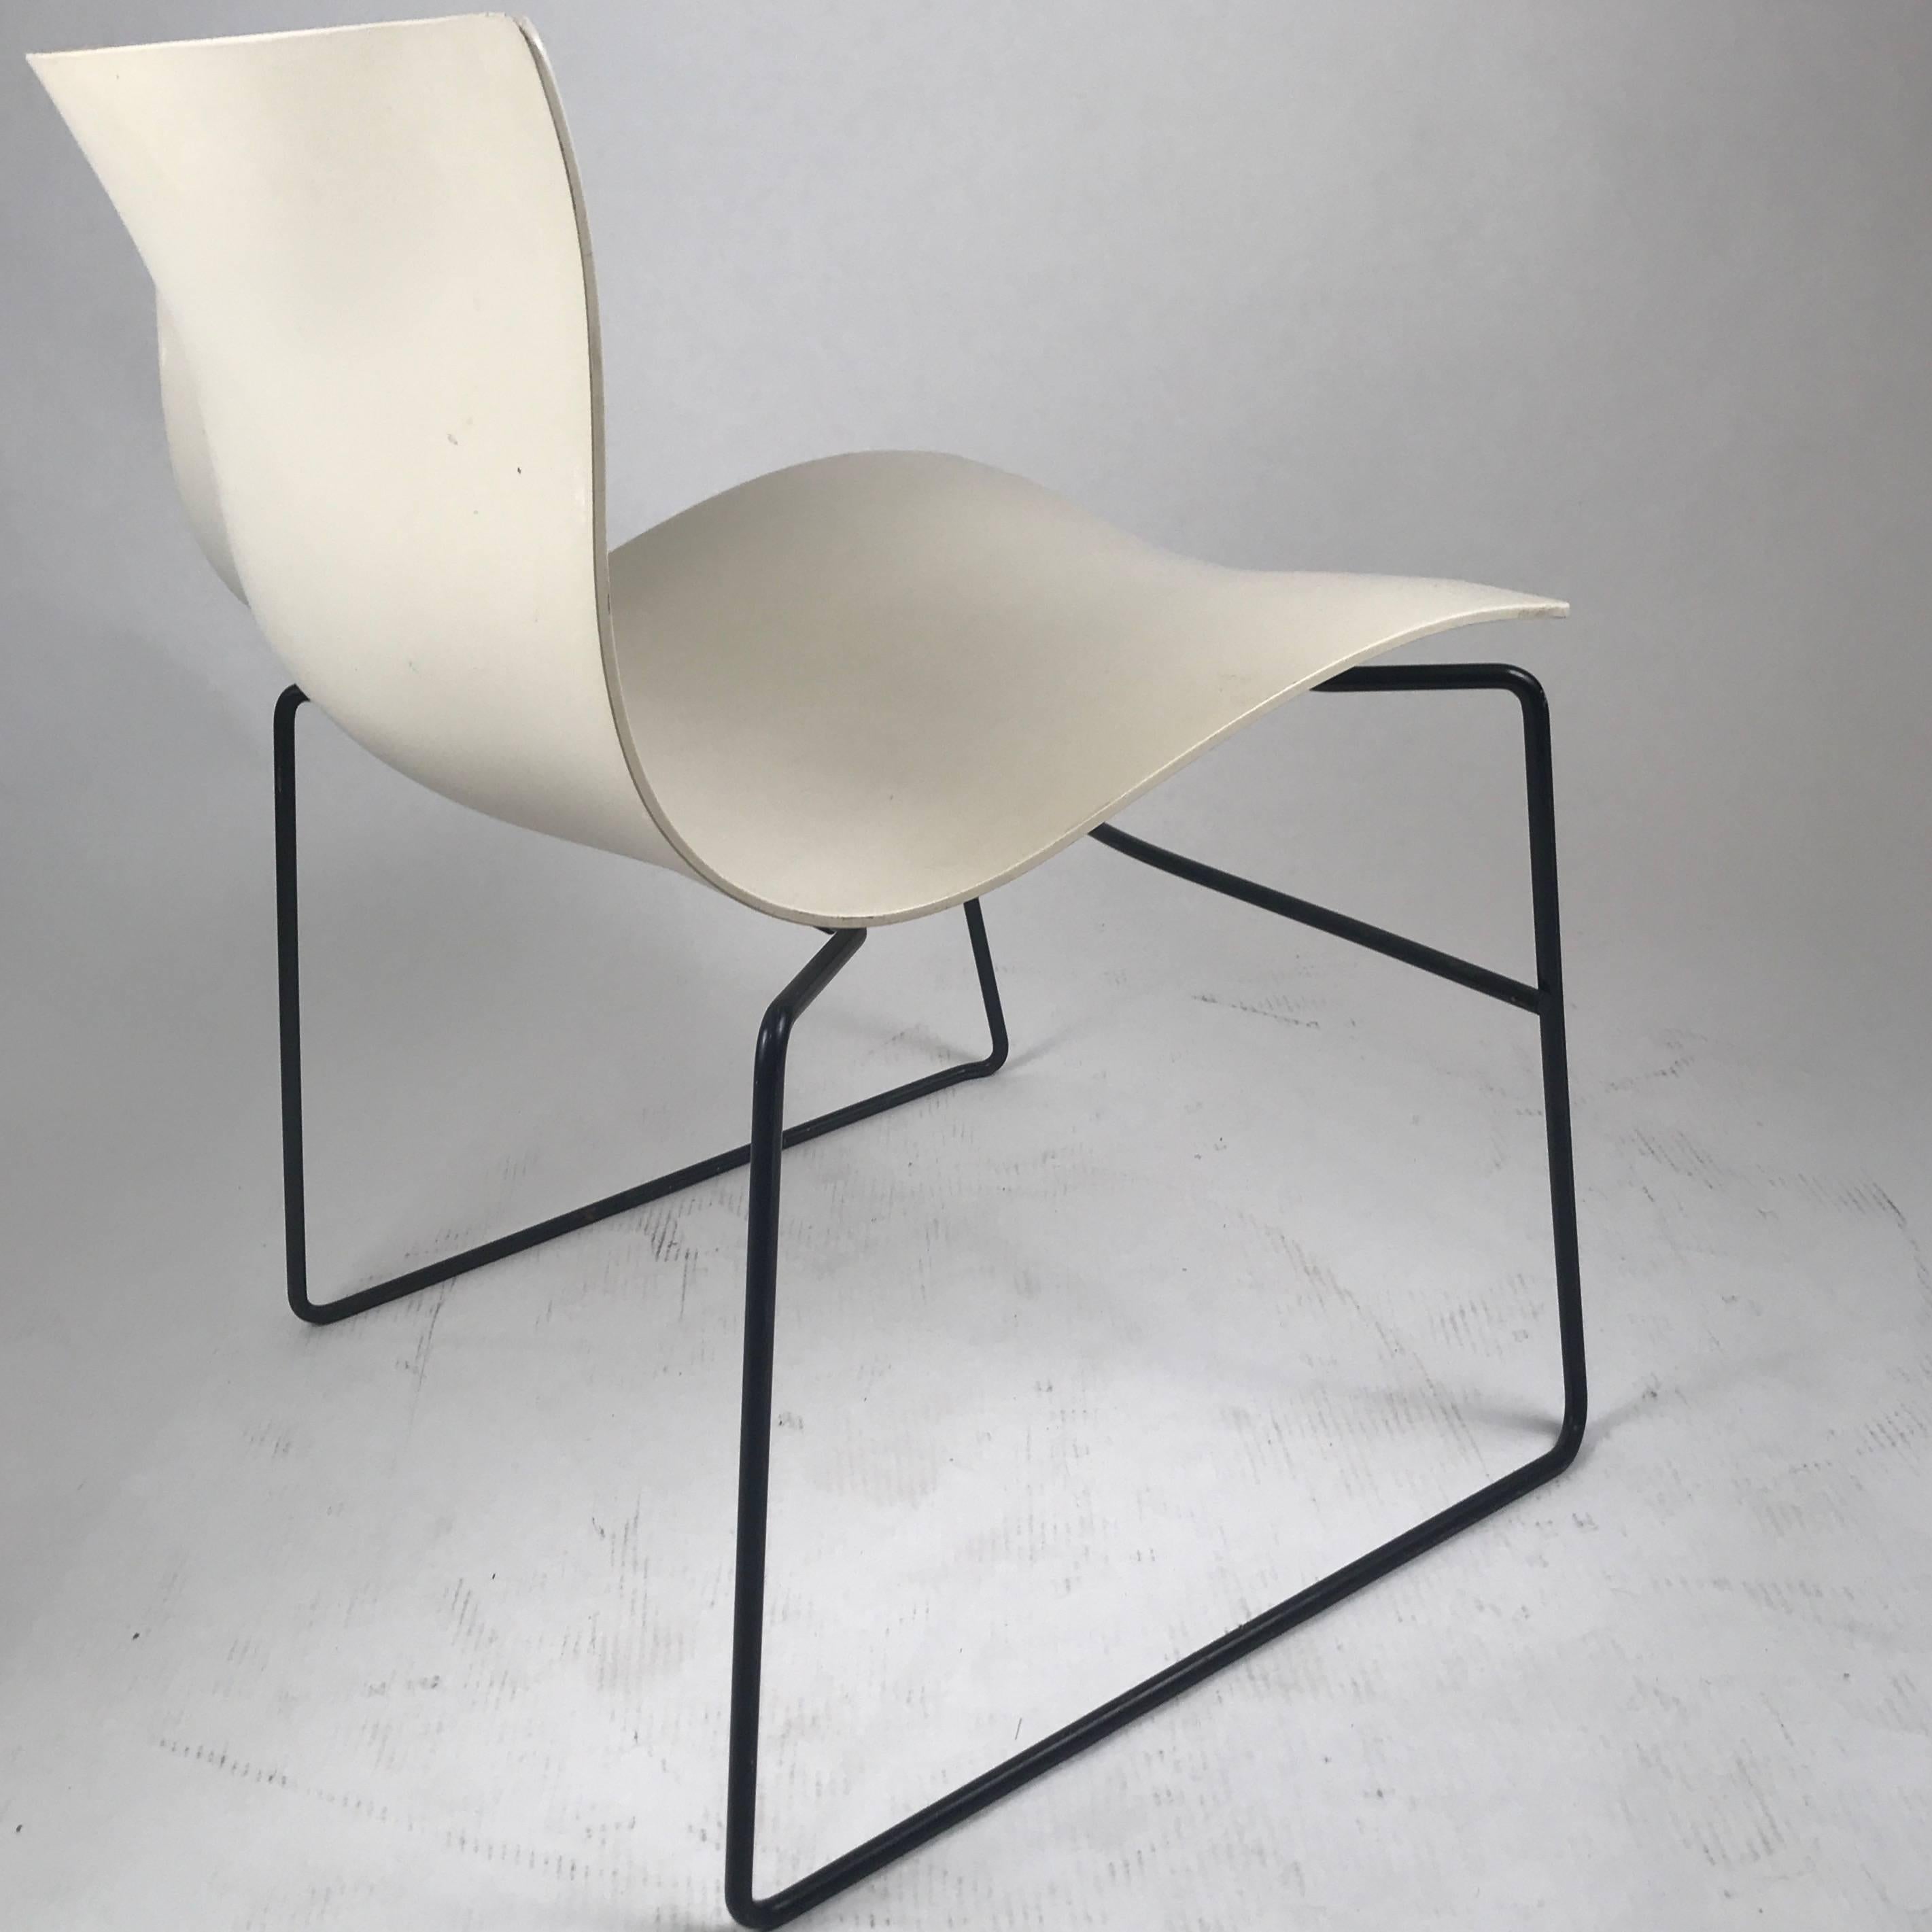 Post-Modern Knoll Massimo Vignelli Handkerchief Stacking Chairs in Black & White 40 Avail